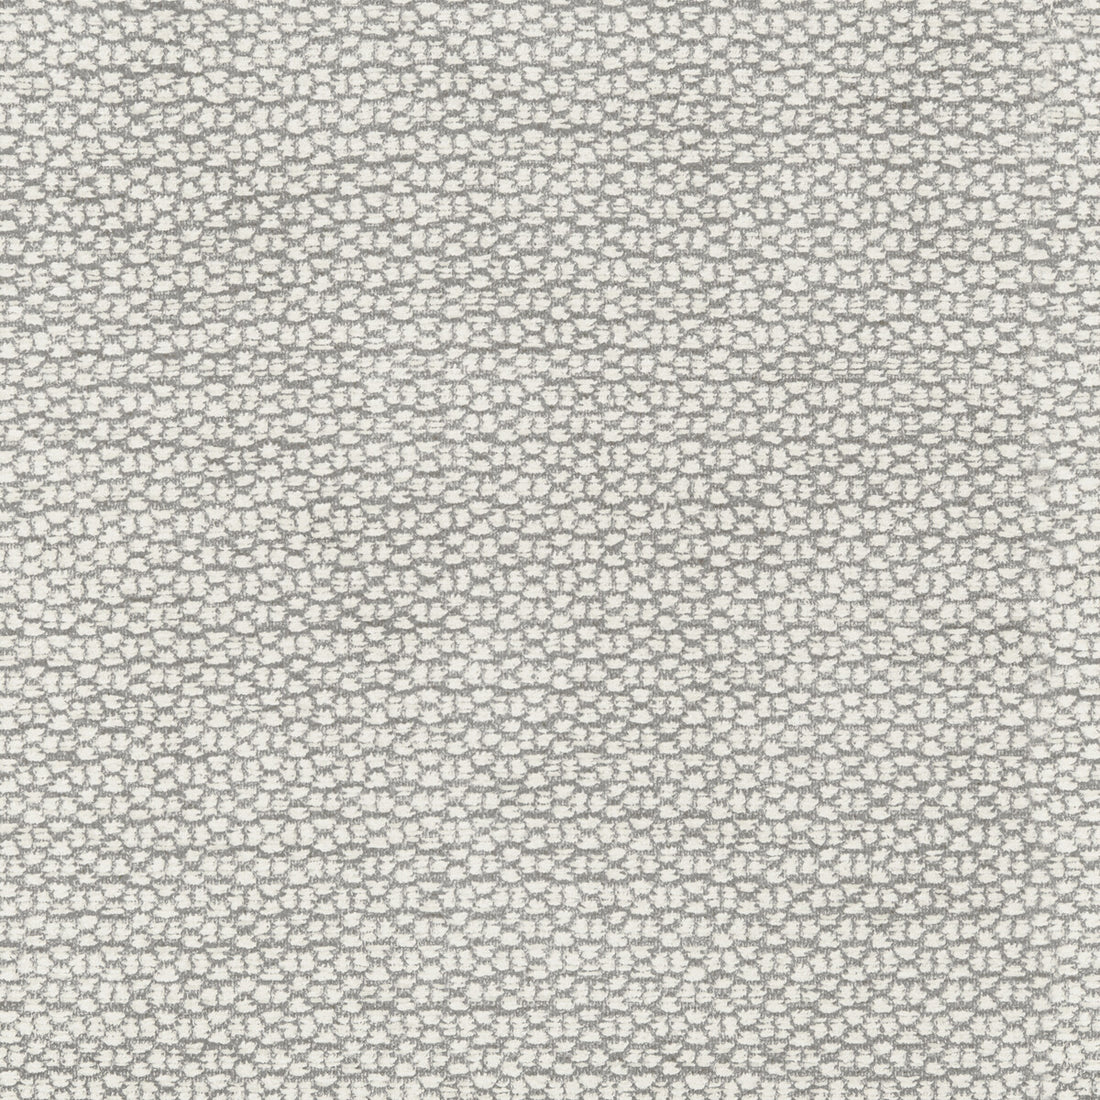 Marolay Texture fabric in grey color - pattern 8019144.11.0 - by Brunschwig &amp; Fils in the Chambery Textures II collection